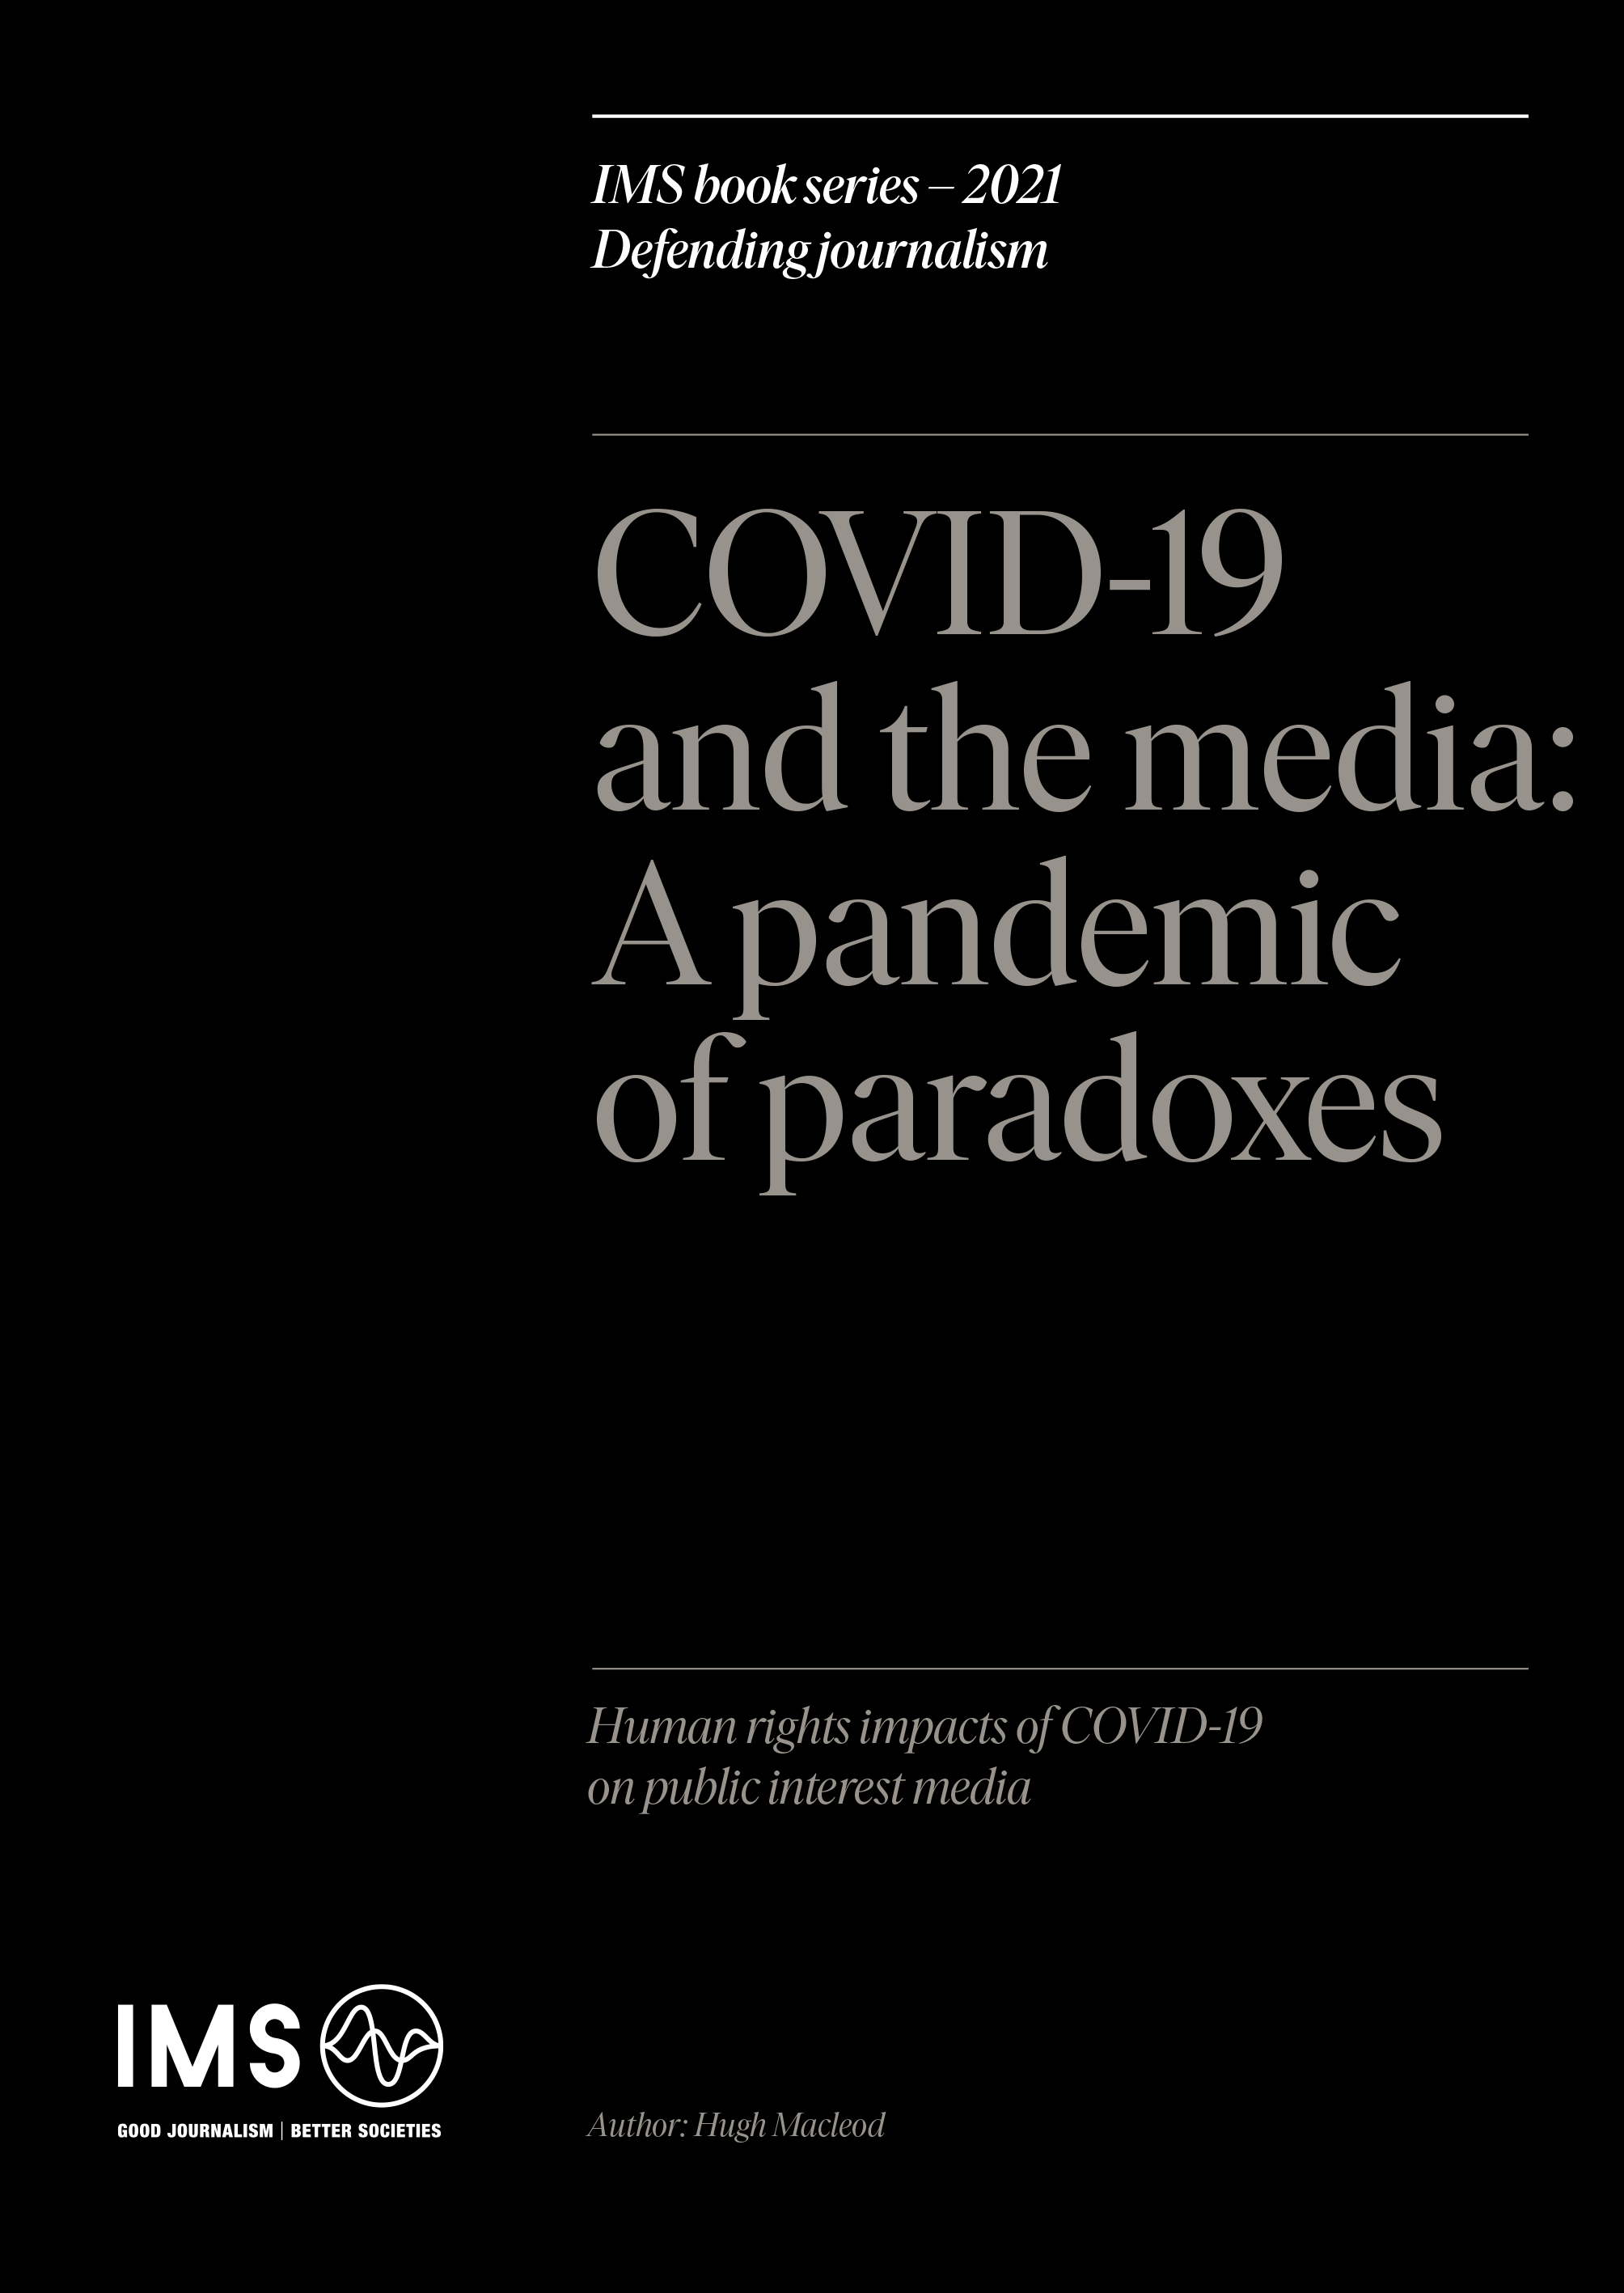 Covid-19 and the media: A pandemic of paradoxes